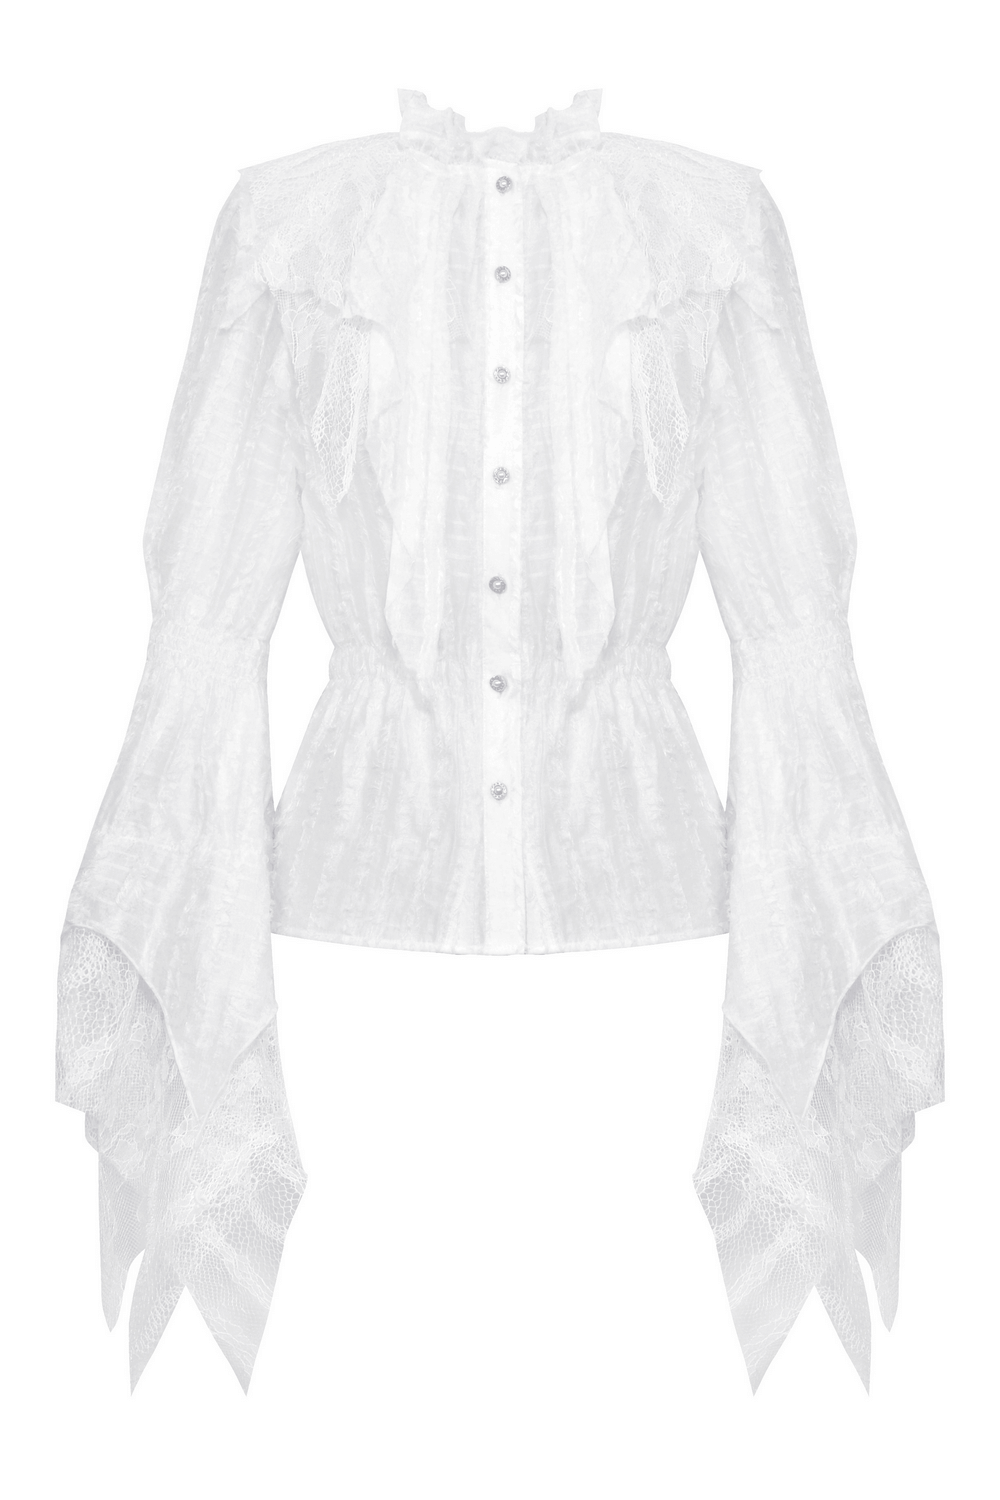 Elegant Ruffle Neck Lace Blouse with Bell Sleeves